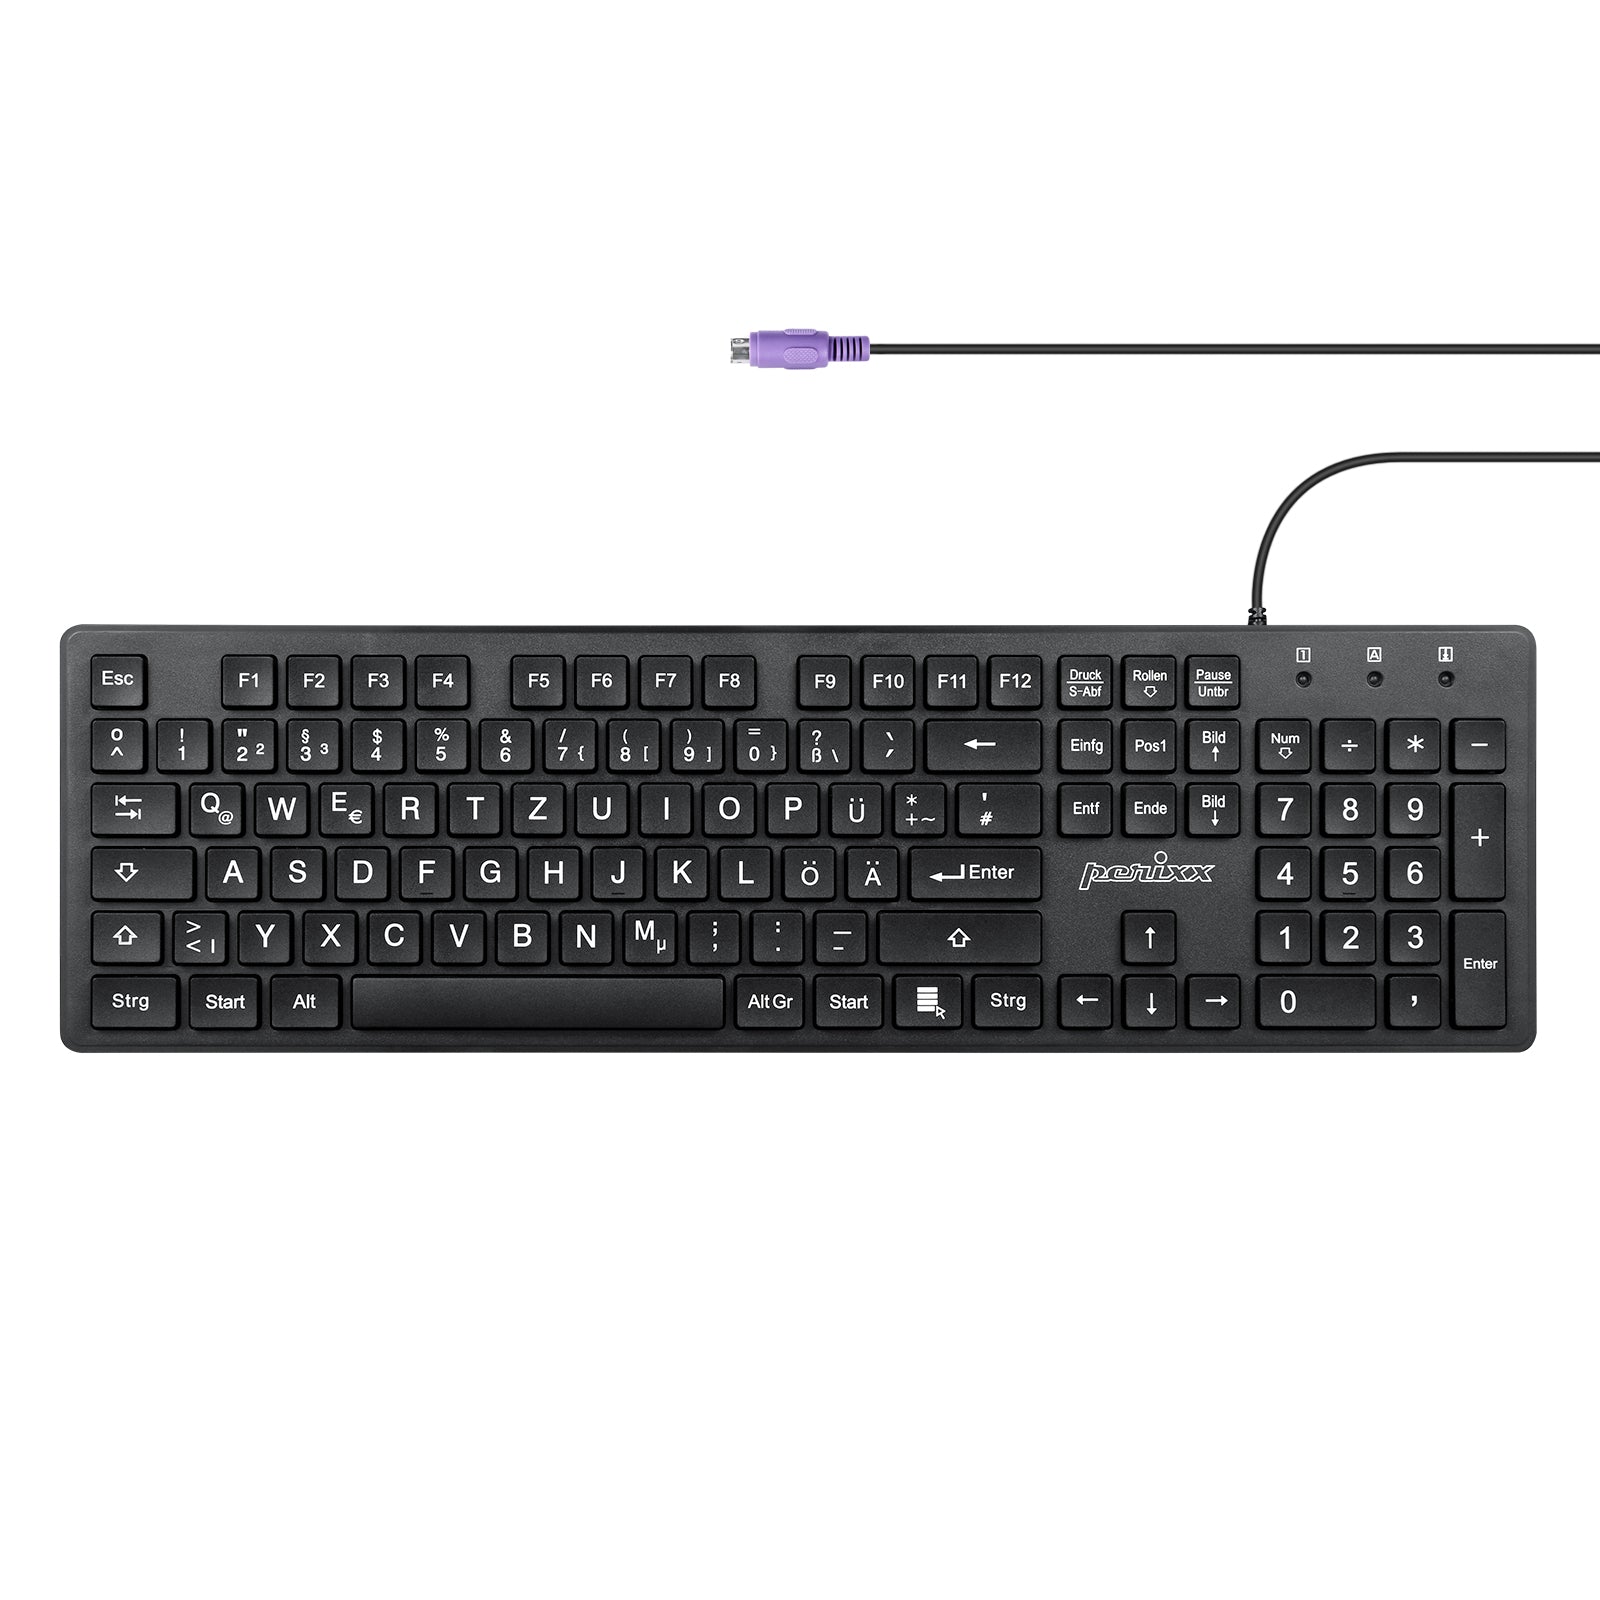 PERIBOARD-117P Wired PS2 Full Size Keyboard - Big Print Letters - Black - English - Perixx Europe